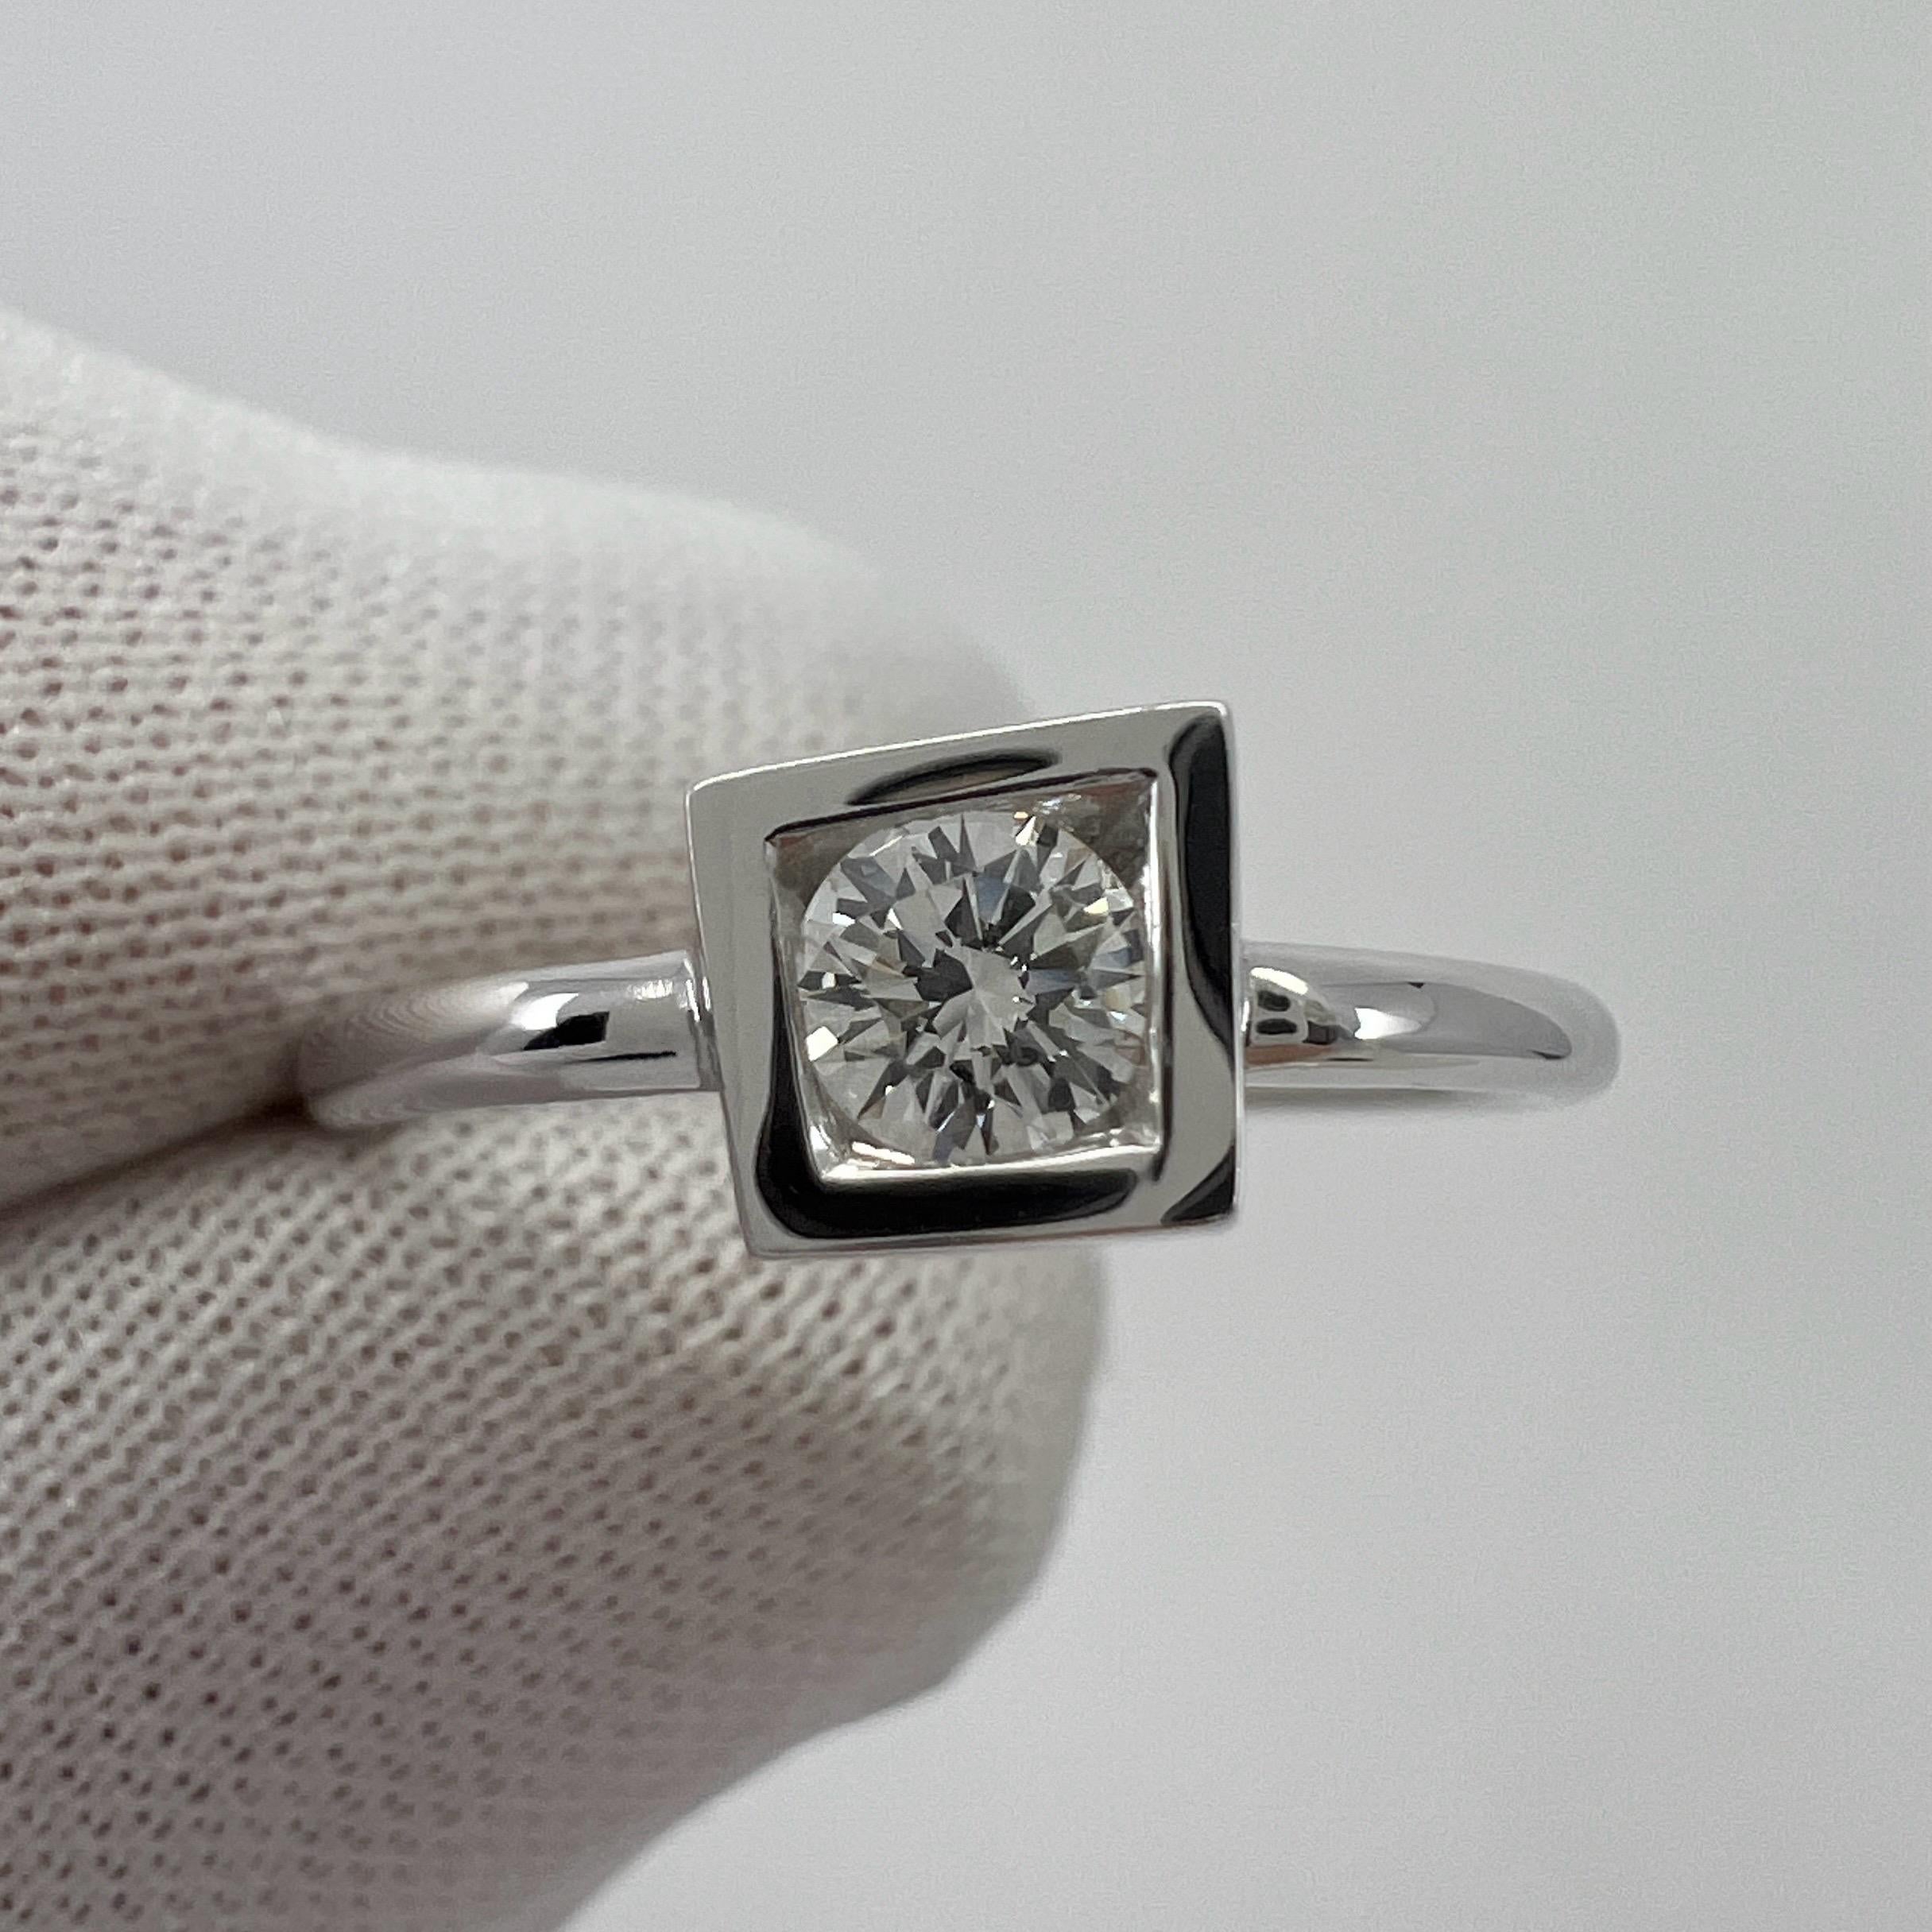 Rare Tiffany & Co Frank Gehry Torque Round Diamond 18k White Gold Solitaire Ring For Sale 7